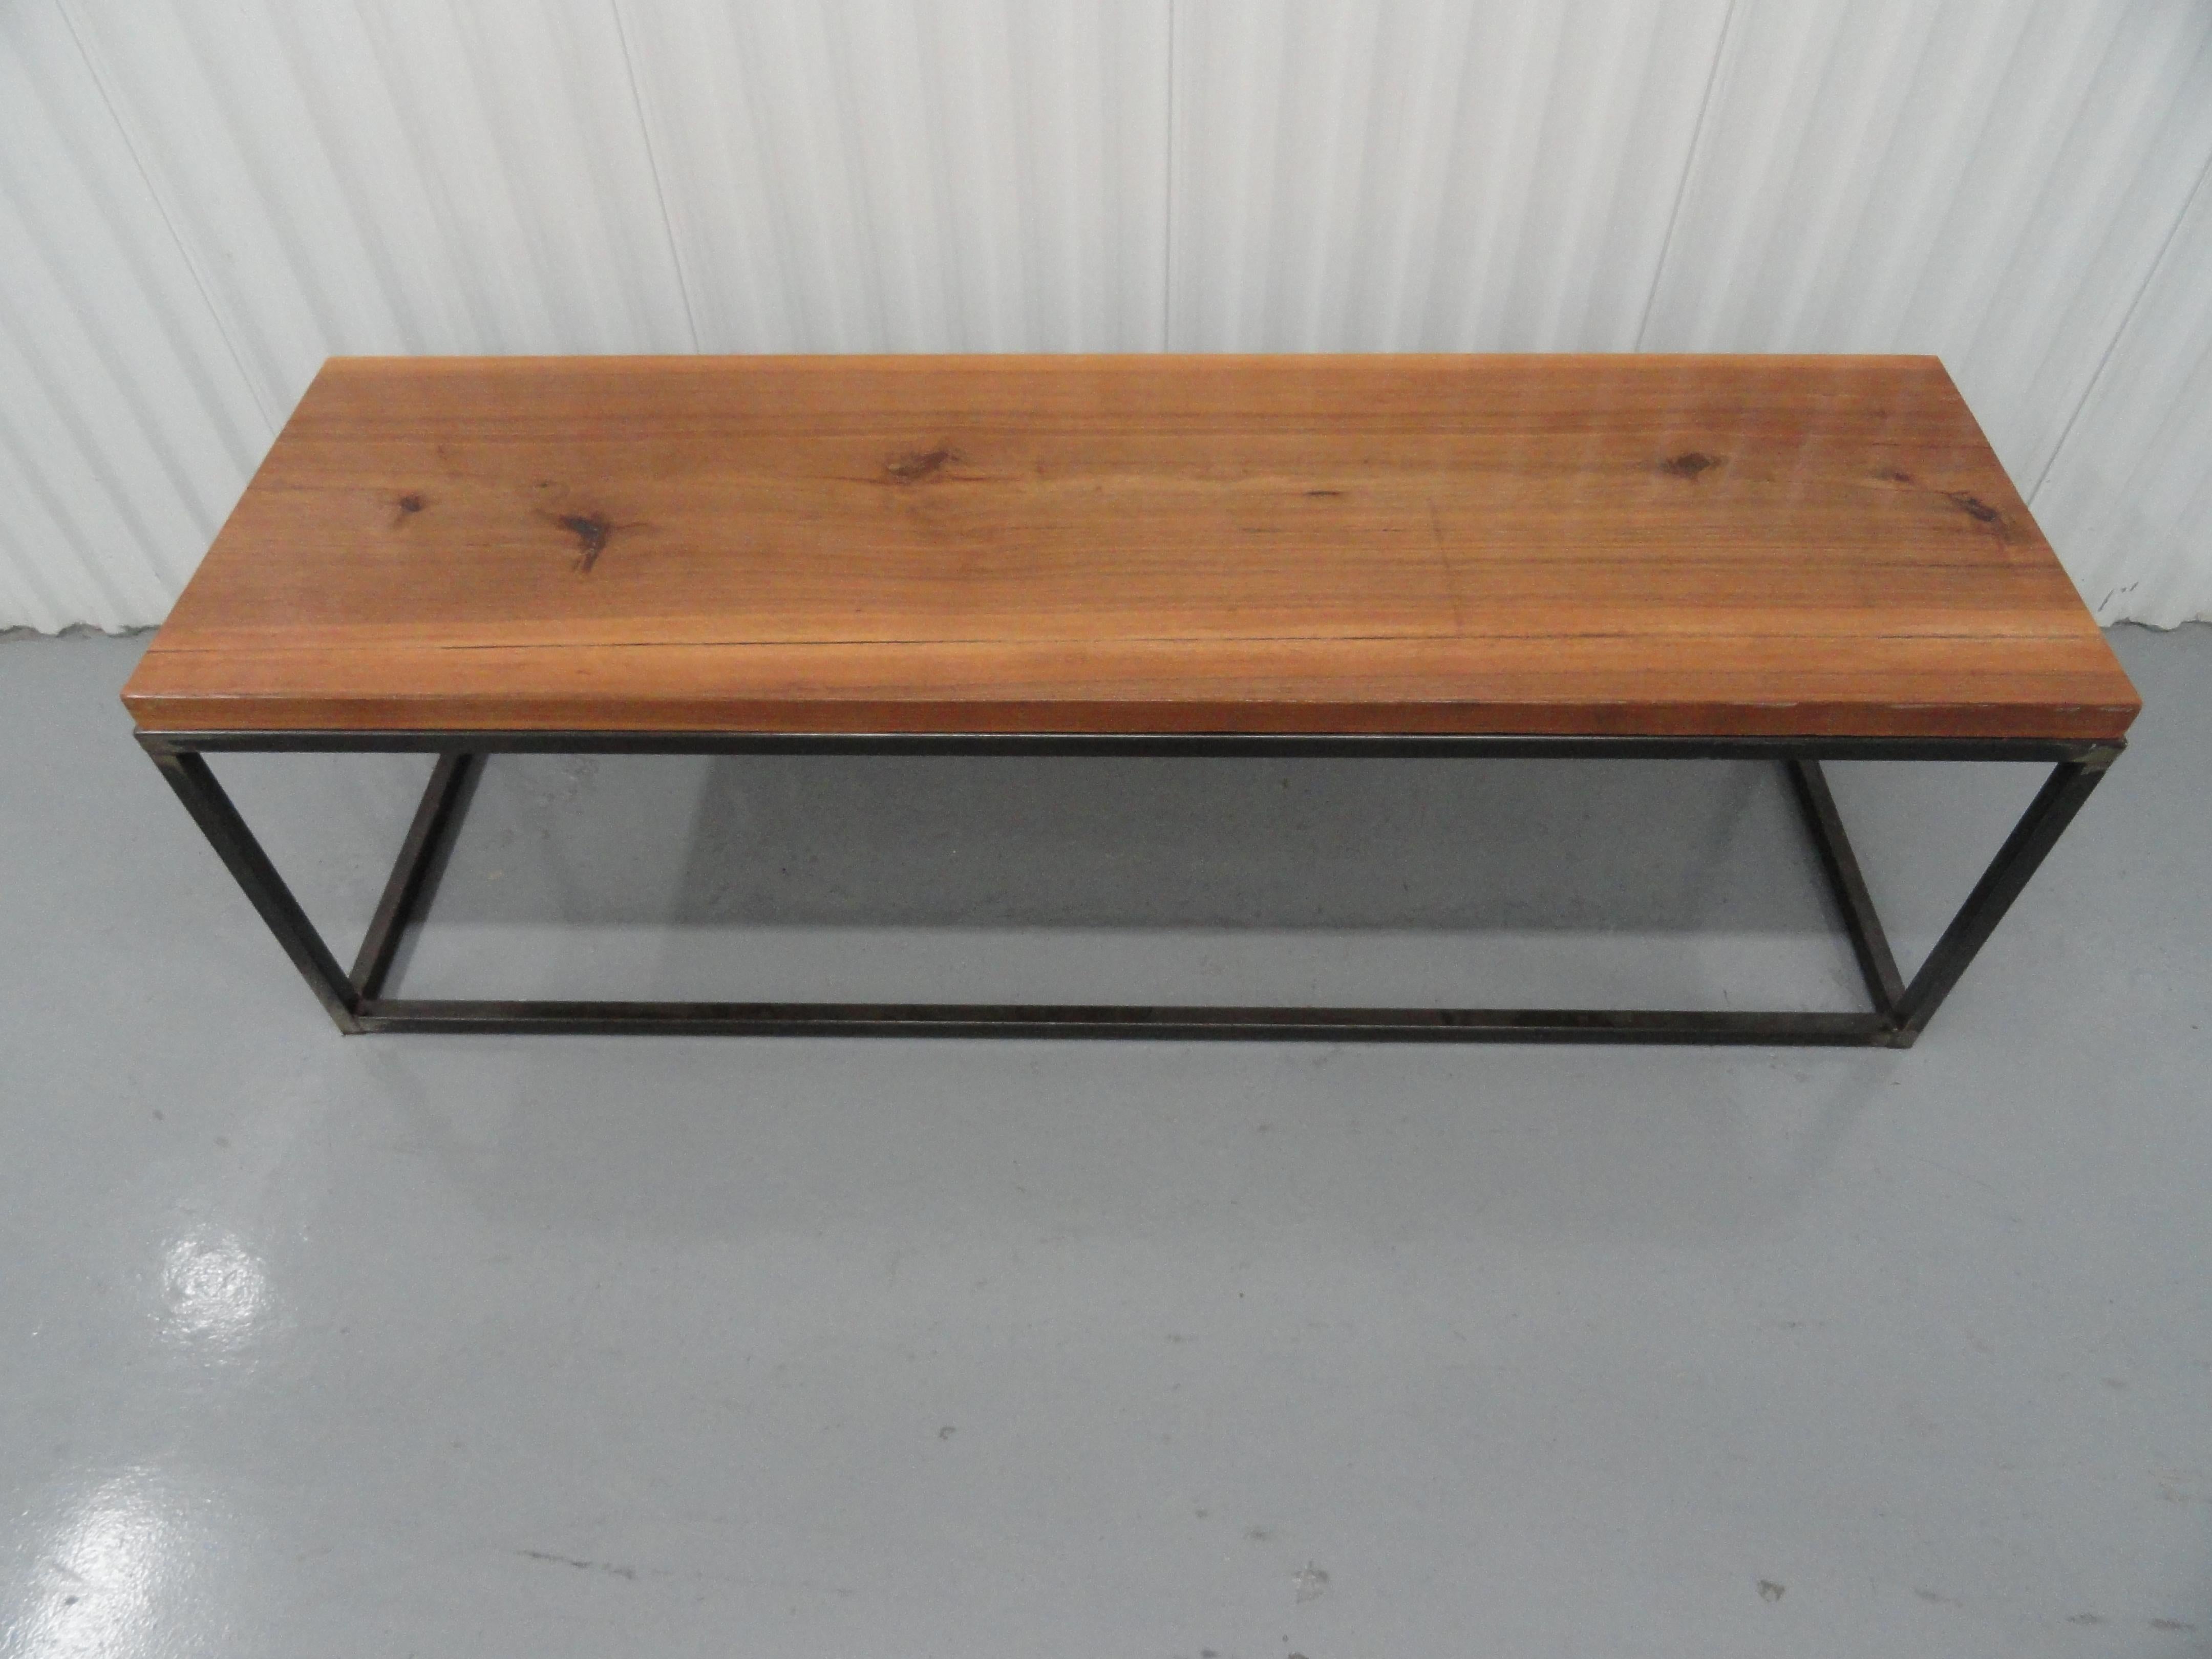 Custom-made wood and metal coffee table. Steel frame with oak finished top.